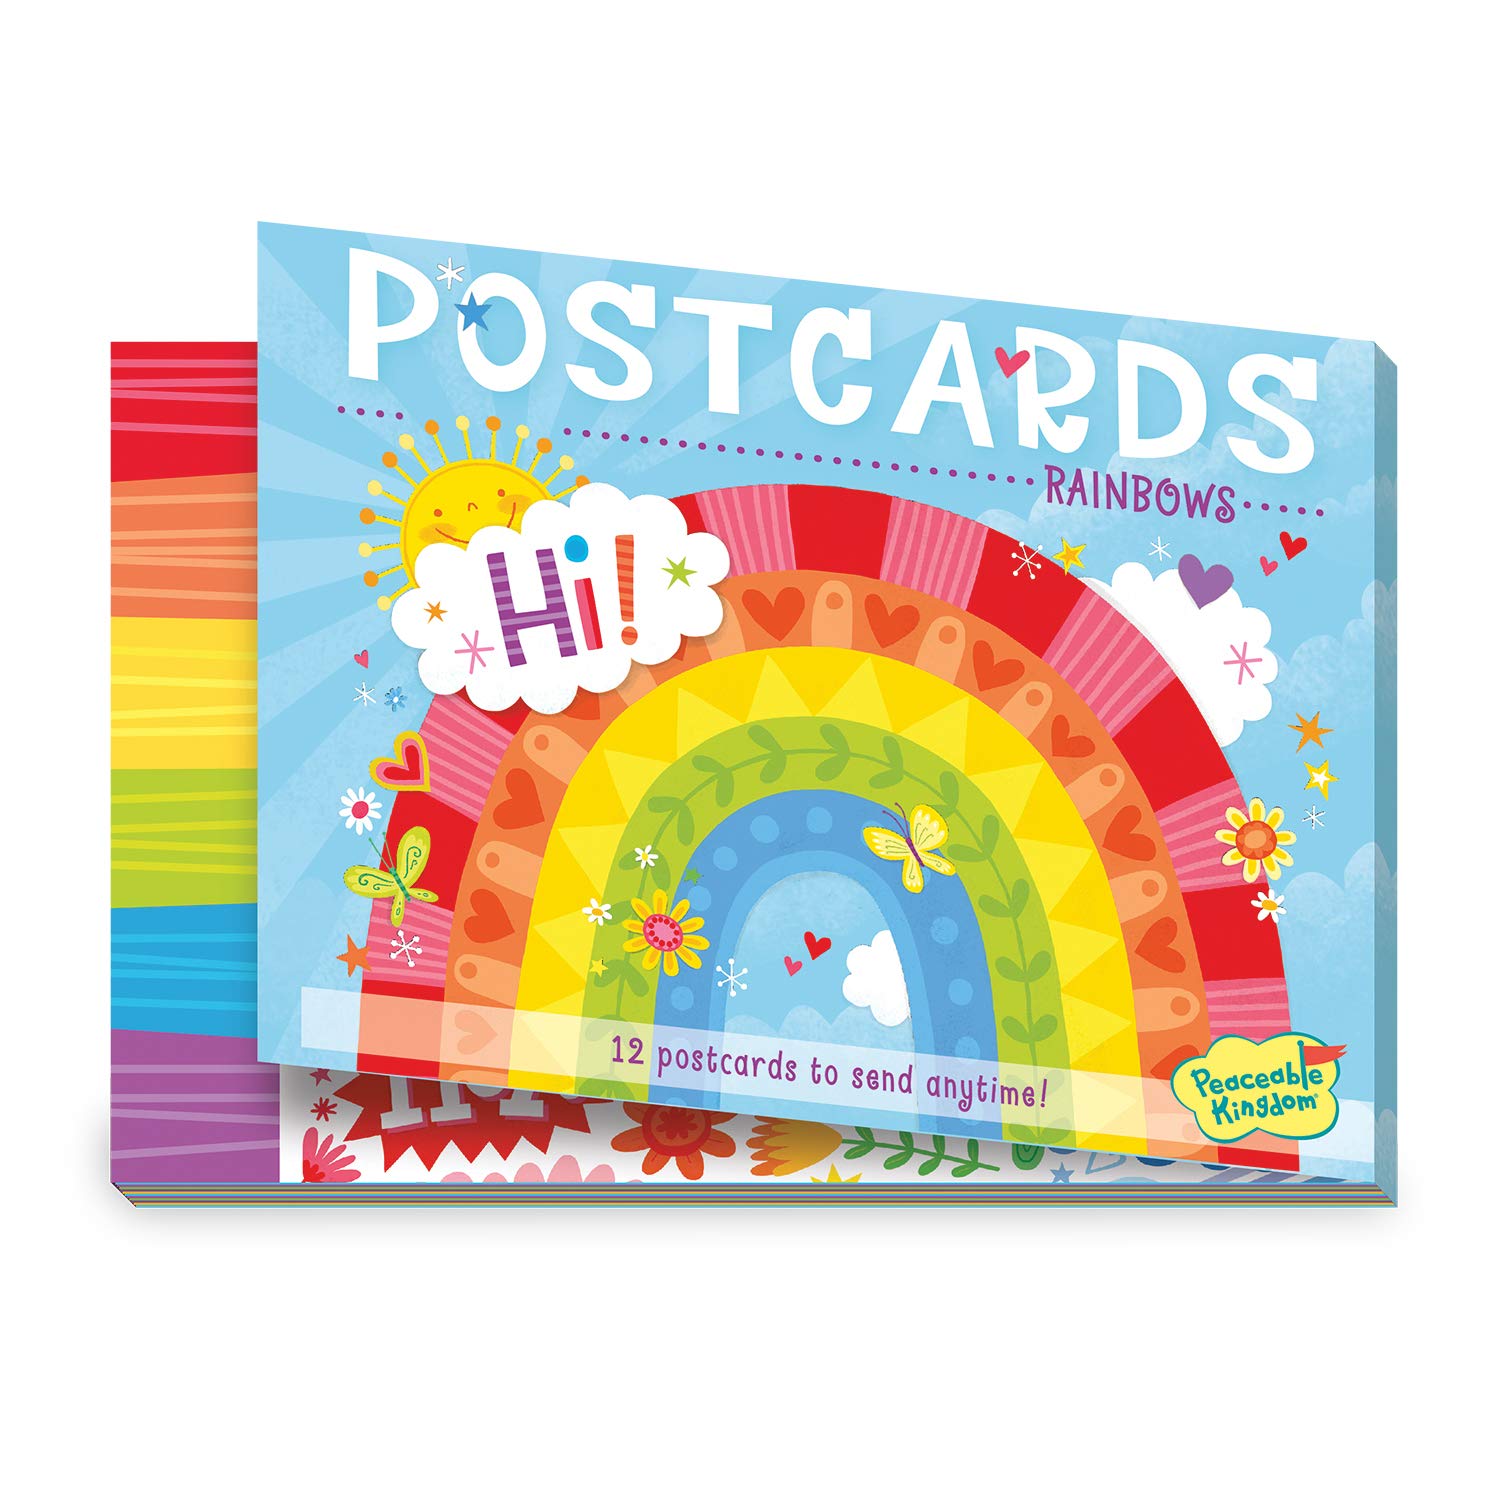 Book Cover Peaceable Kingdom 12 Postcard Booklet for kids – Rainbow Theme - 3 each of 4 designs – Send love with rainbow, peace & love postcard styles for boys & girls – Great for summer camp